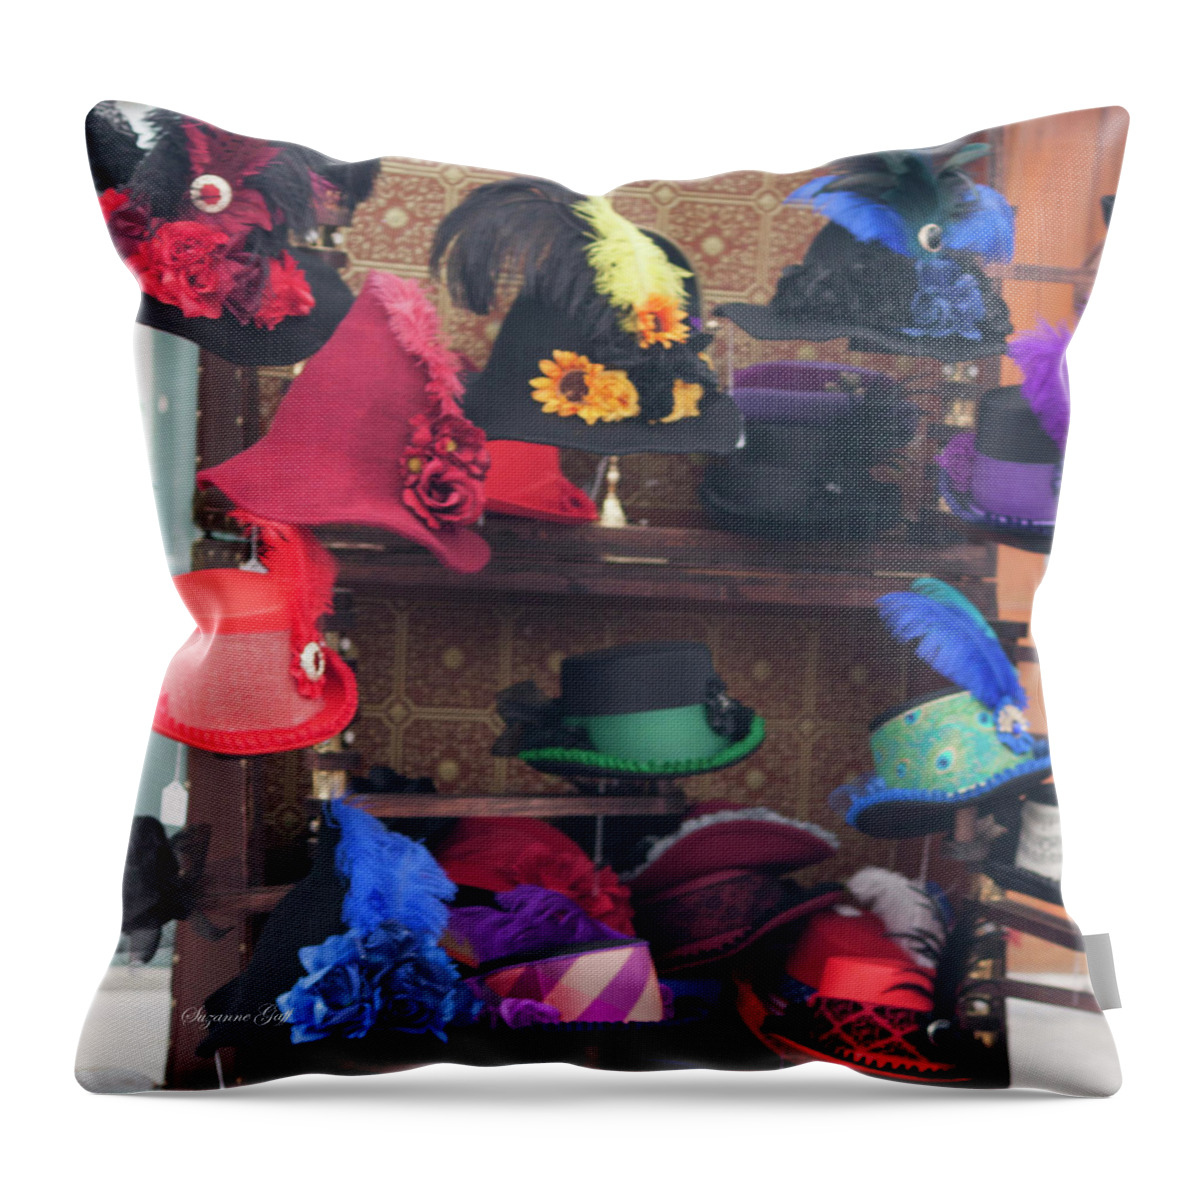 Photograph Throw Pillow featuring the photograph Heavenly Hats Squared by Suzanne Gaff